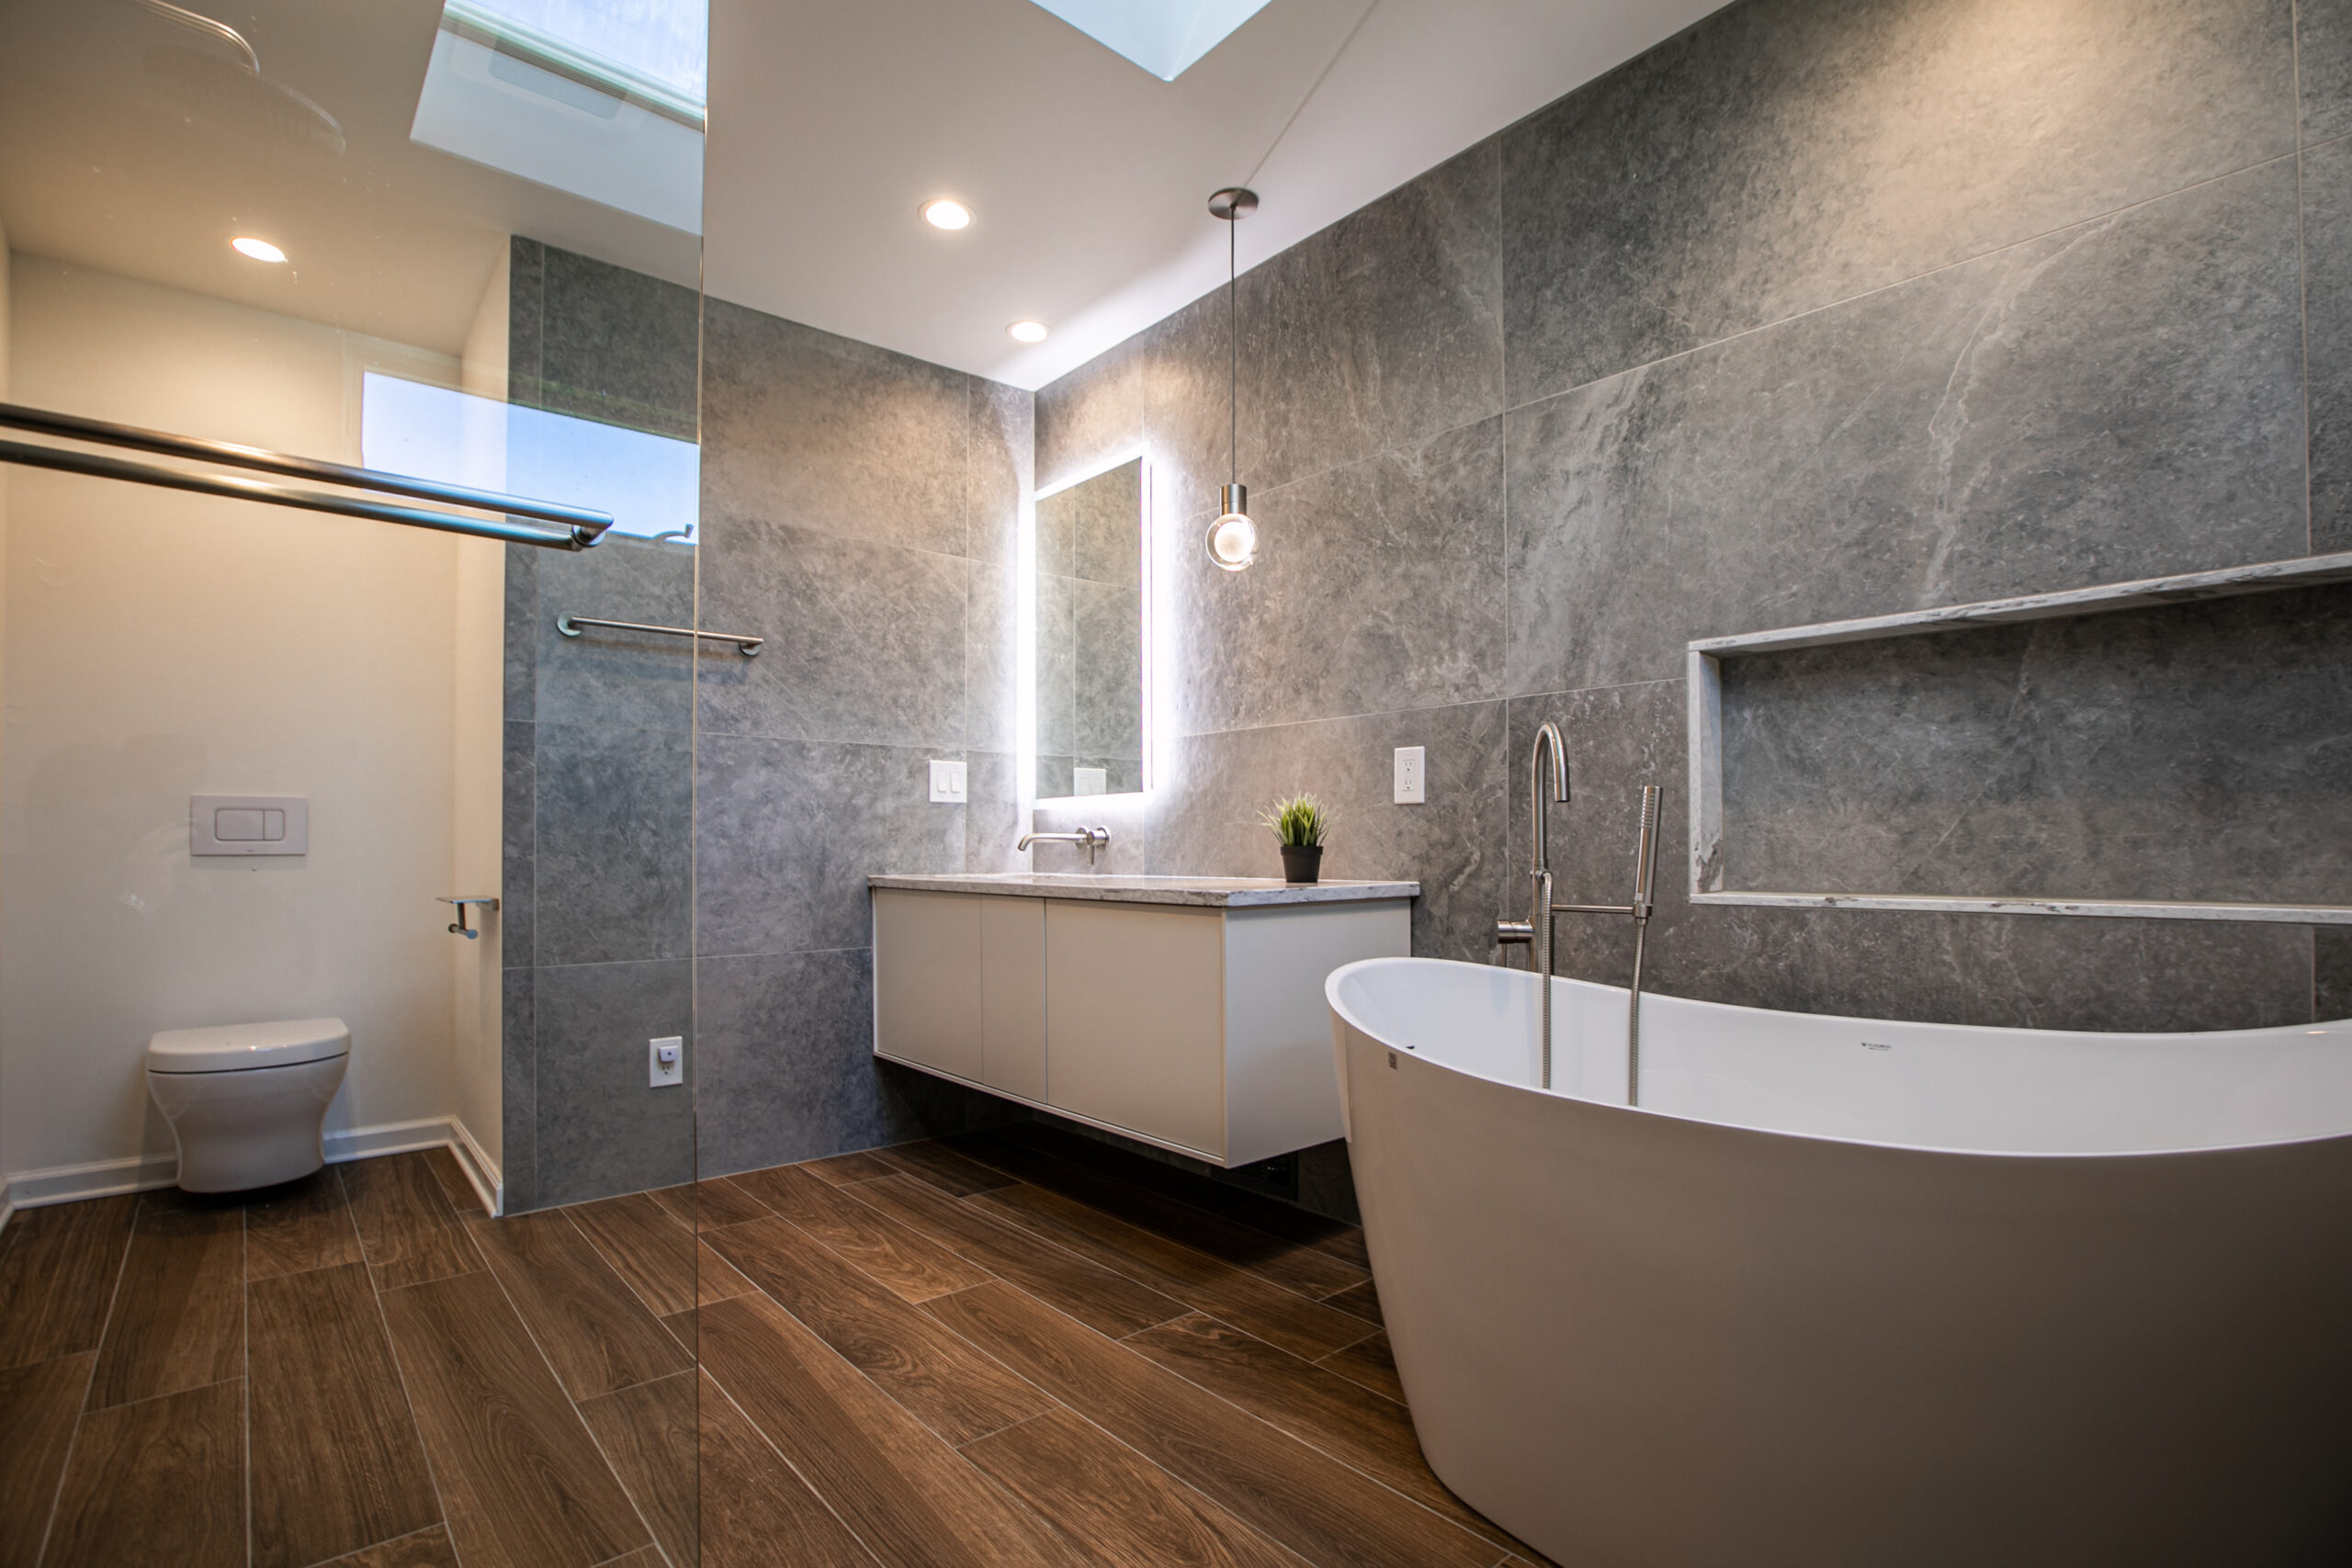 Step into Style: Get Your Dream Contemporary Primary Bathroom Before the Year Is Over